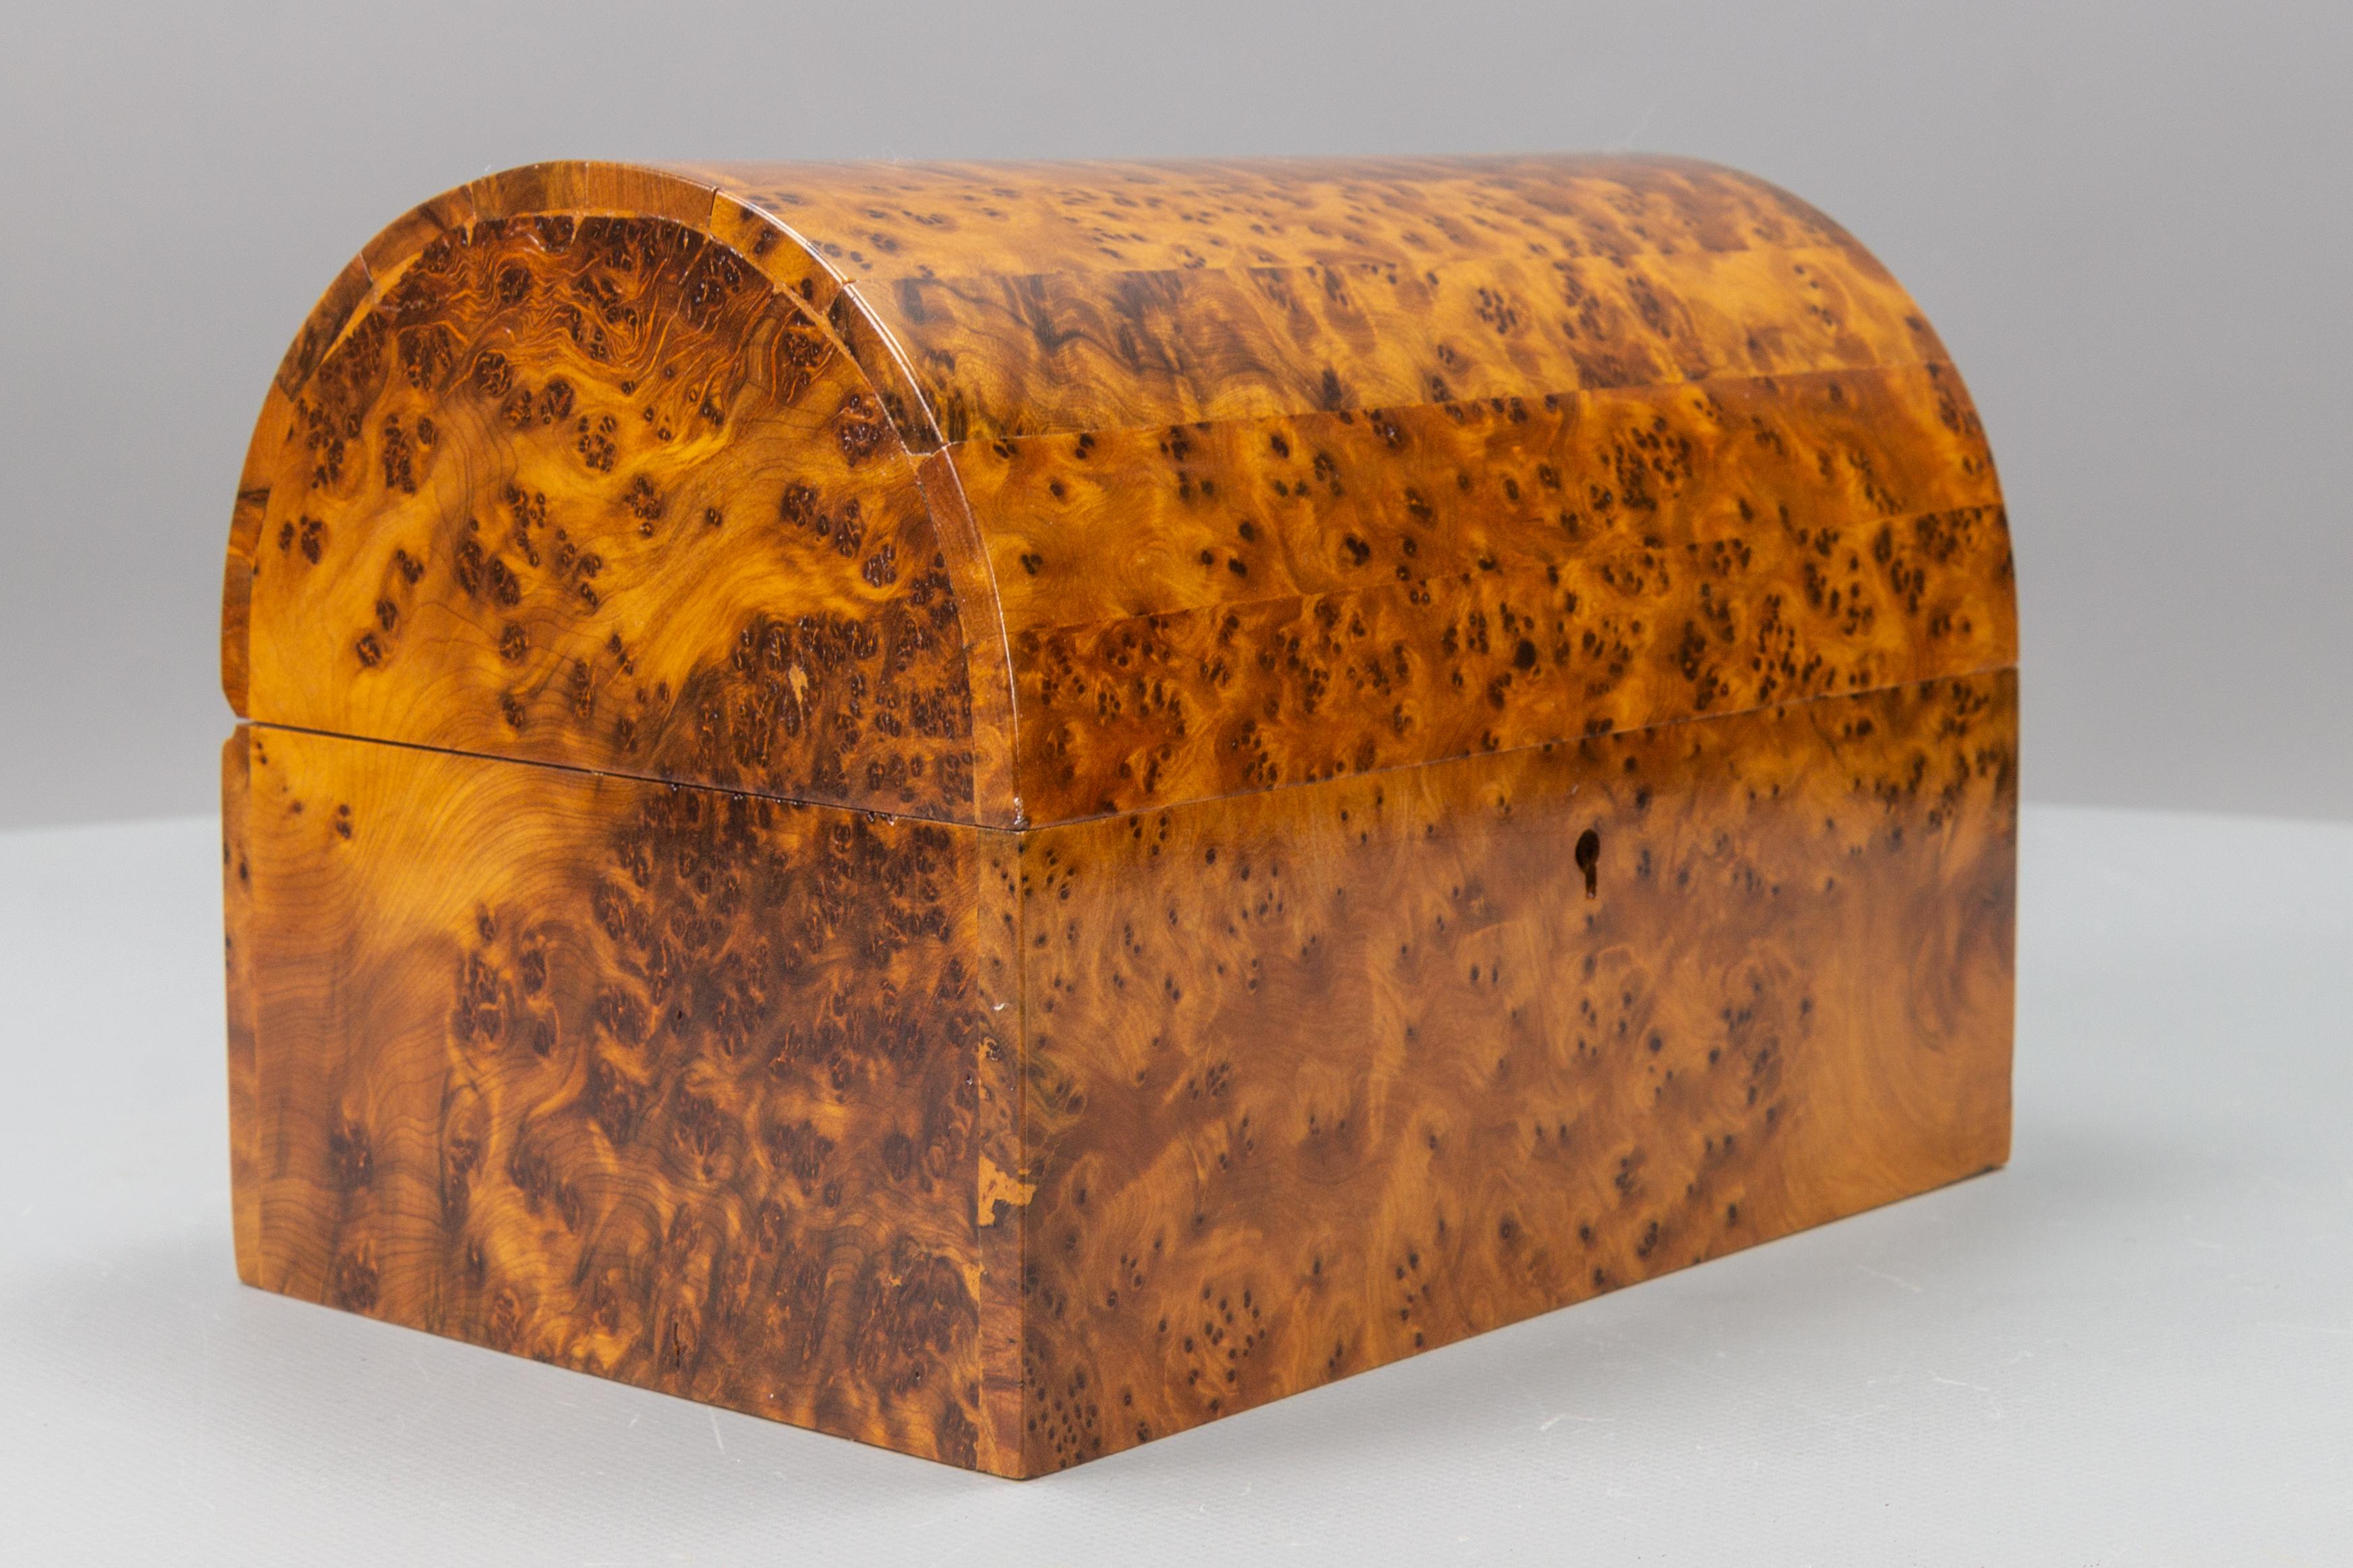 Art Deco style birch wood burl dome top jewelry box, Germany, circa the 1950s.
A beautiful vintage jewelry box made of birch wood burl with a removable tray - divider with three compartments.
In good condition with some signs of aging and use. The